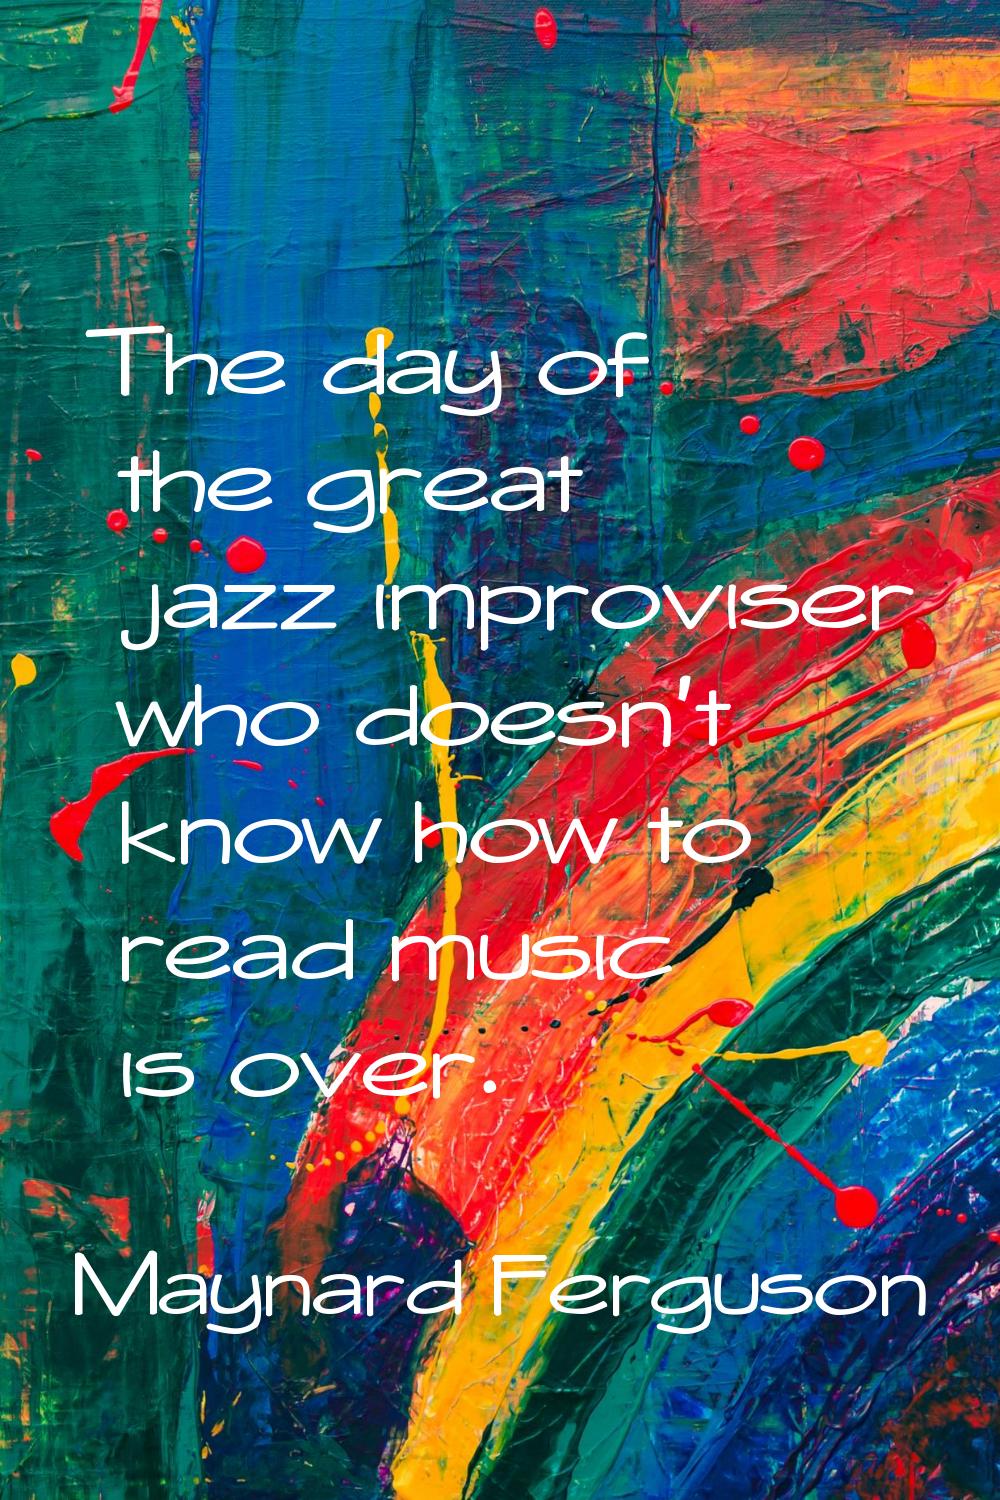 The day of the great jazz improviser who doesn't know how to read music is over.